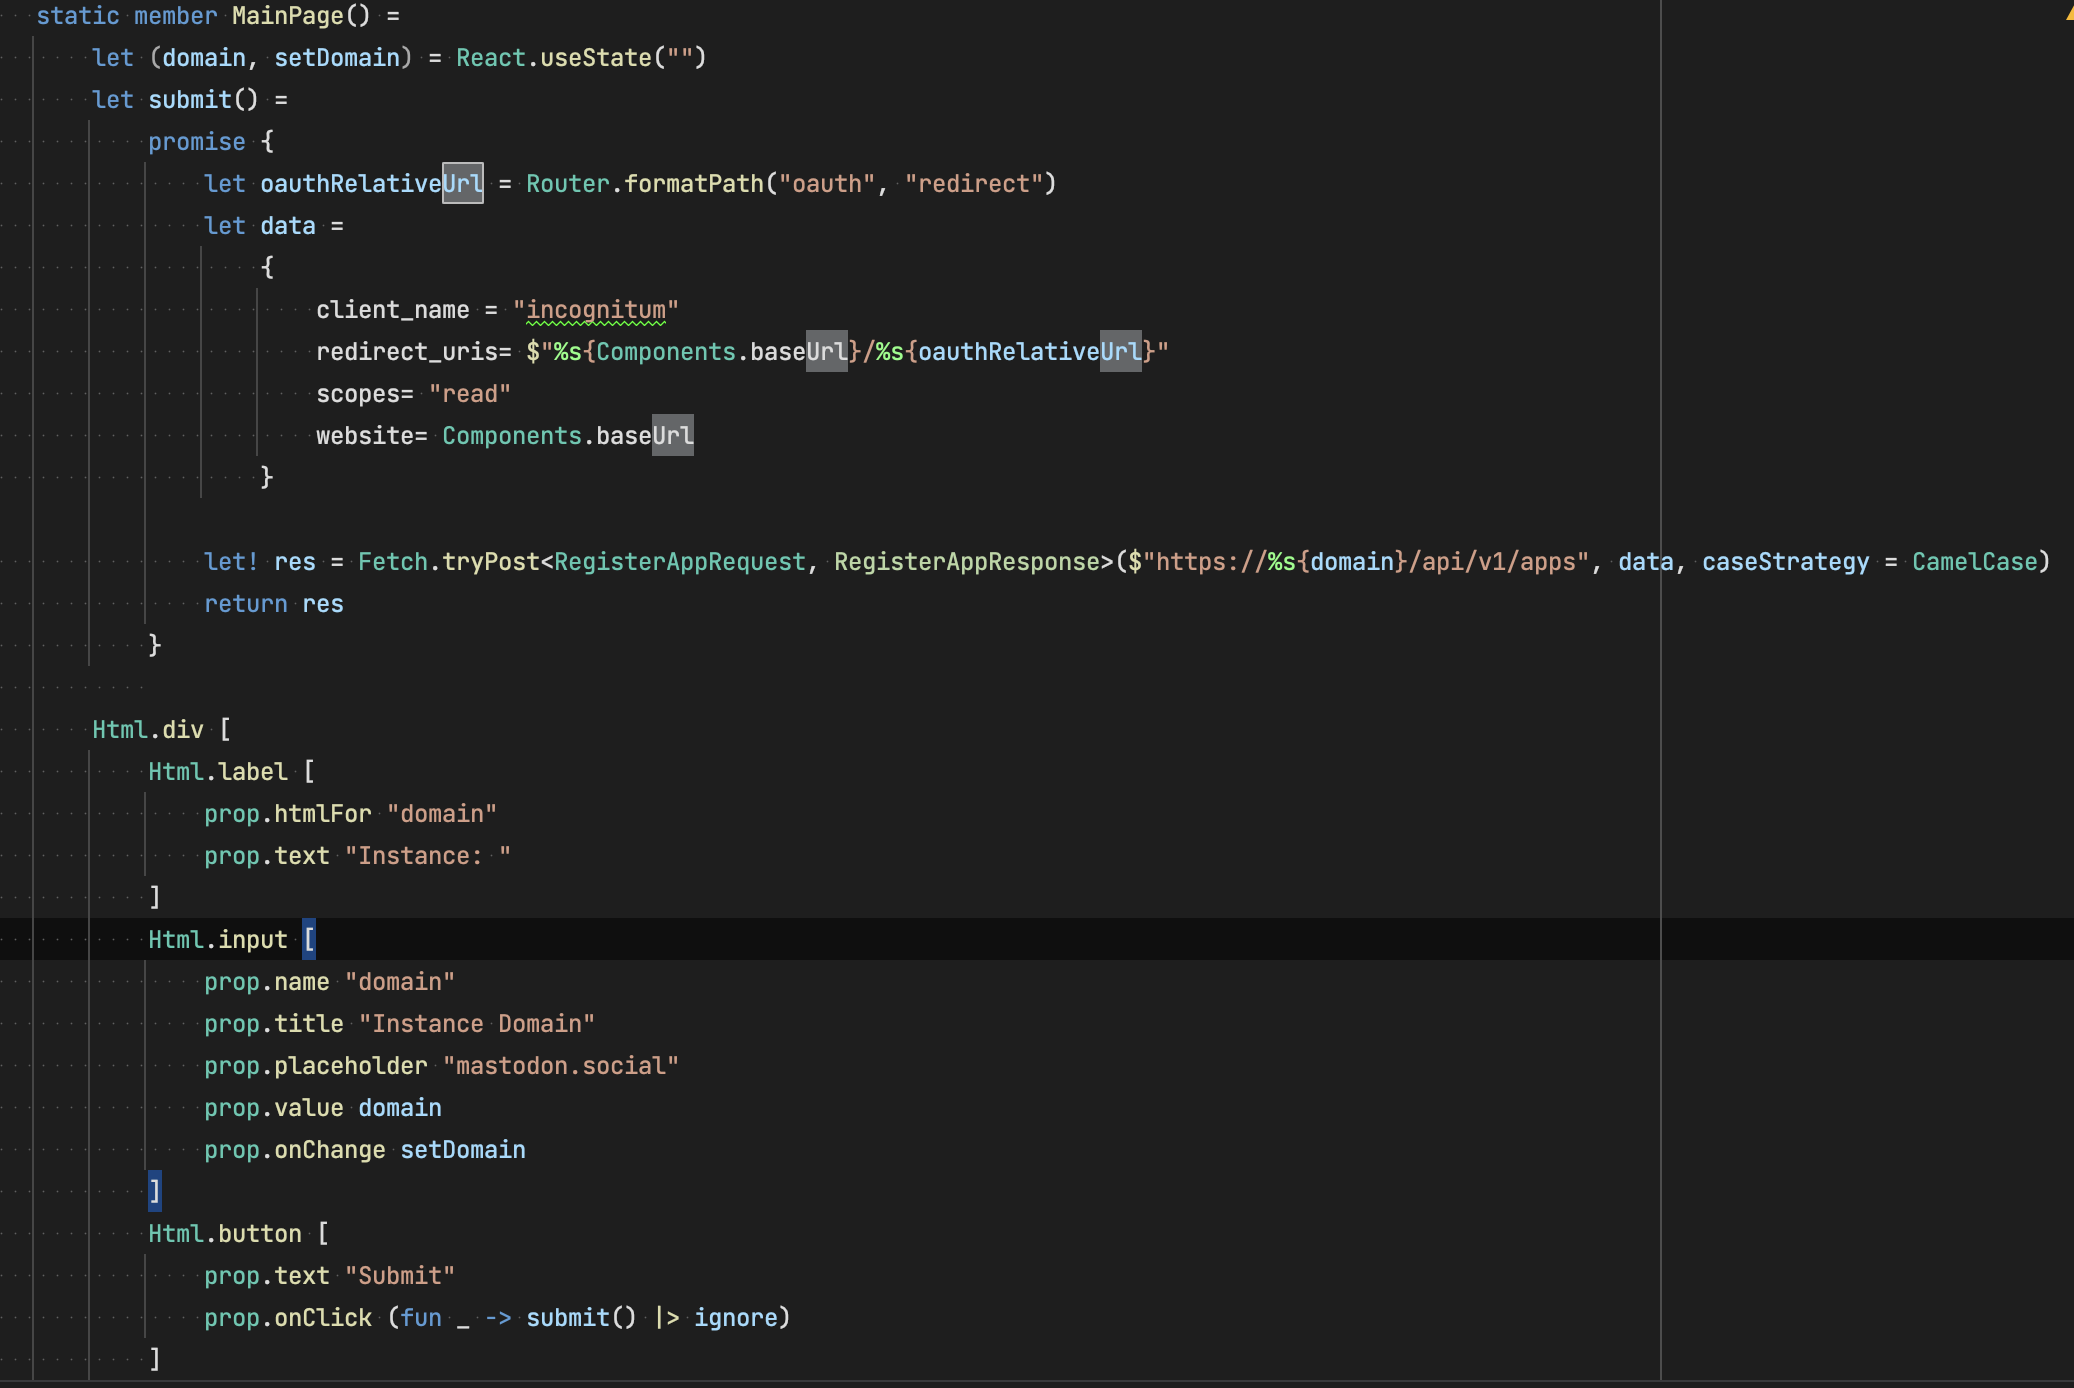 F# code for the Main Page component, with a working HTTP request